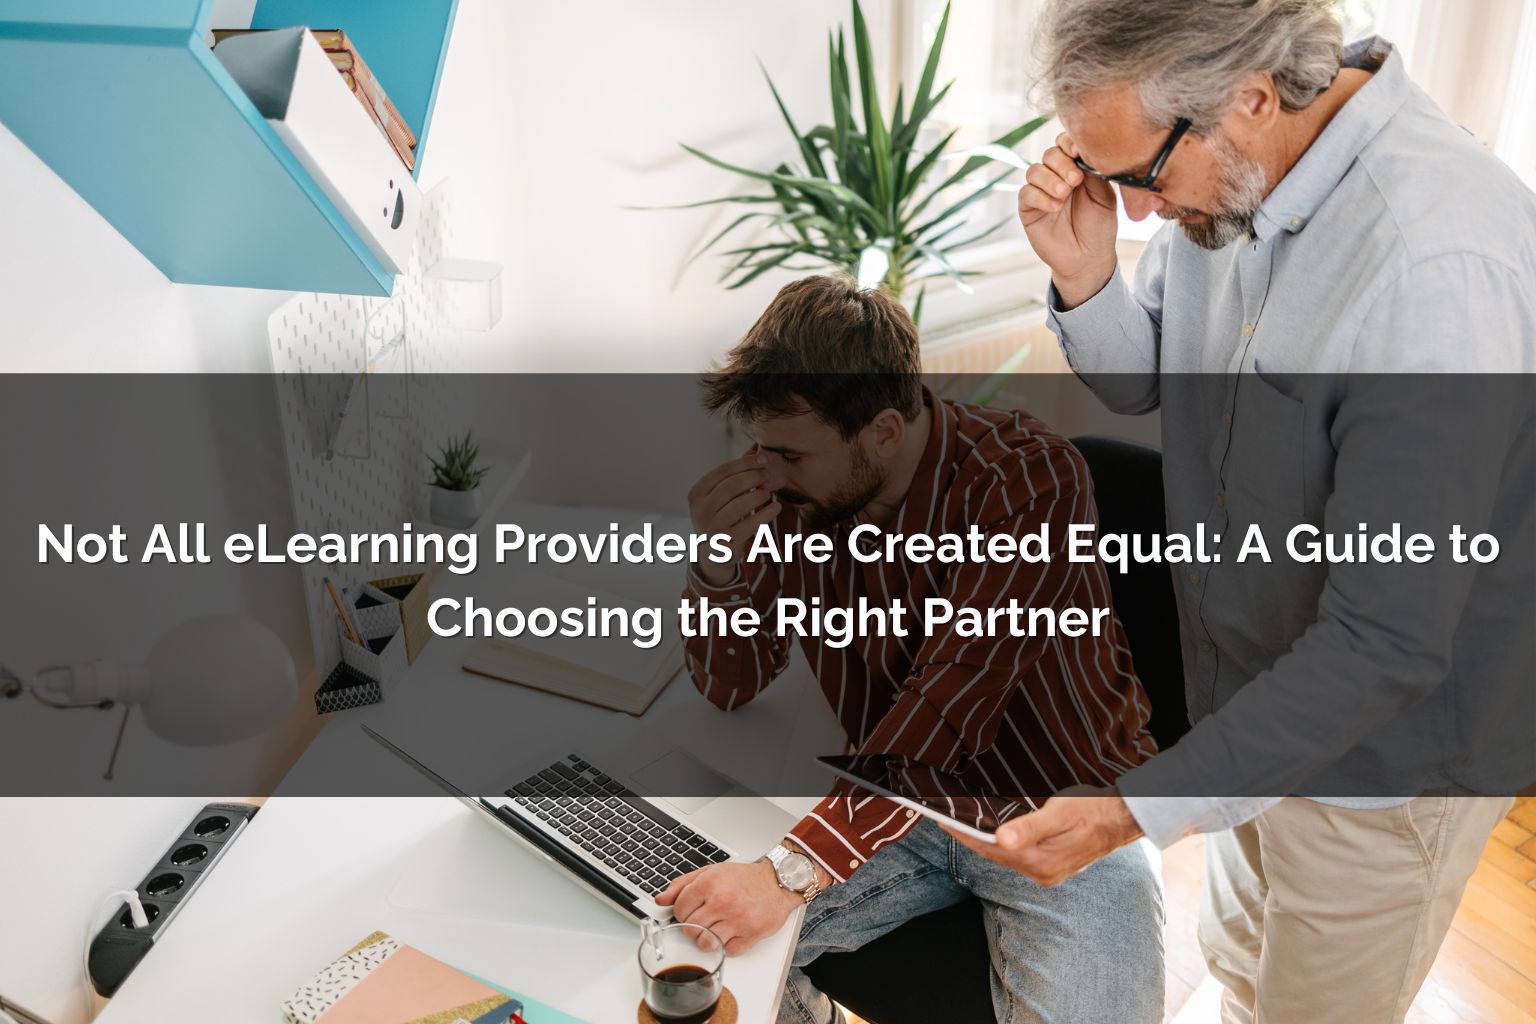 not all elearning providers are created equal - Poncho eLearning